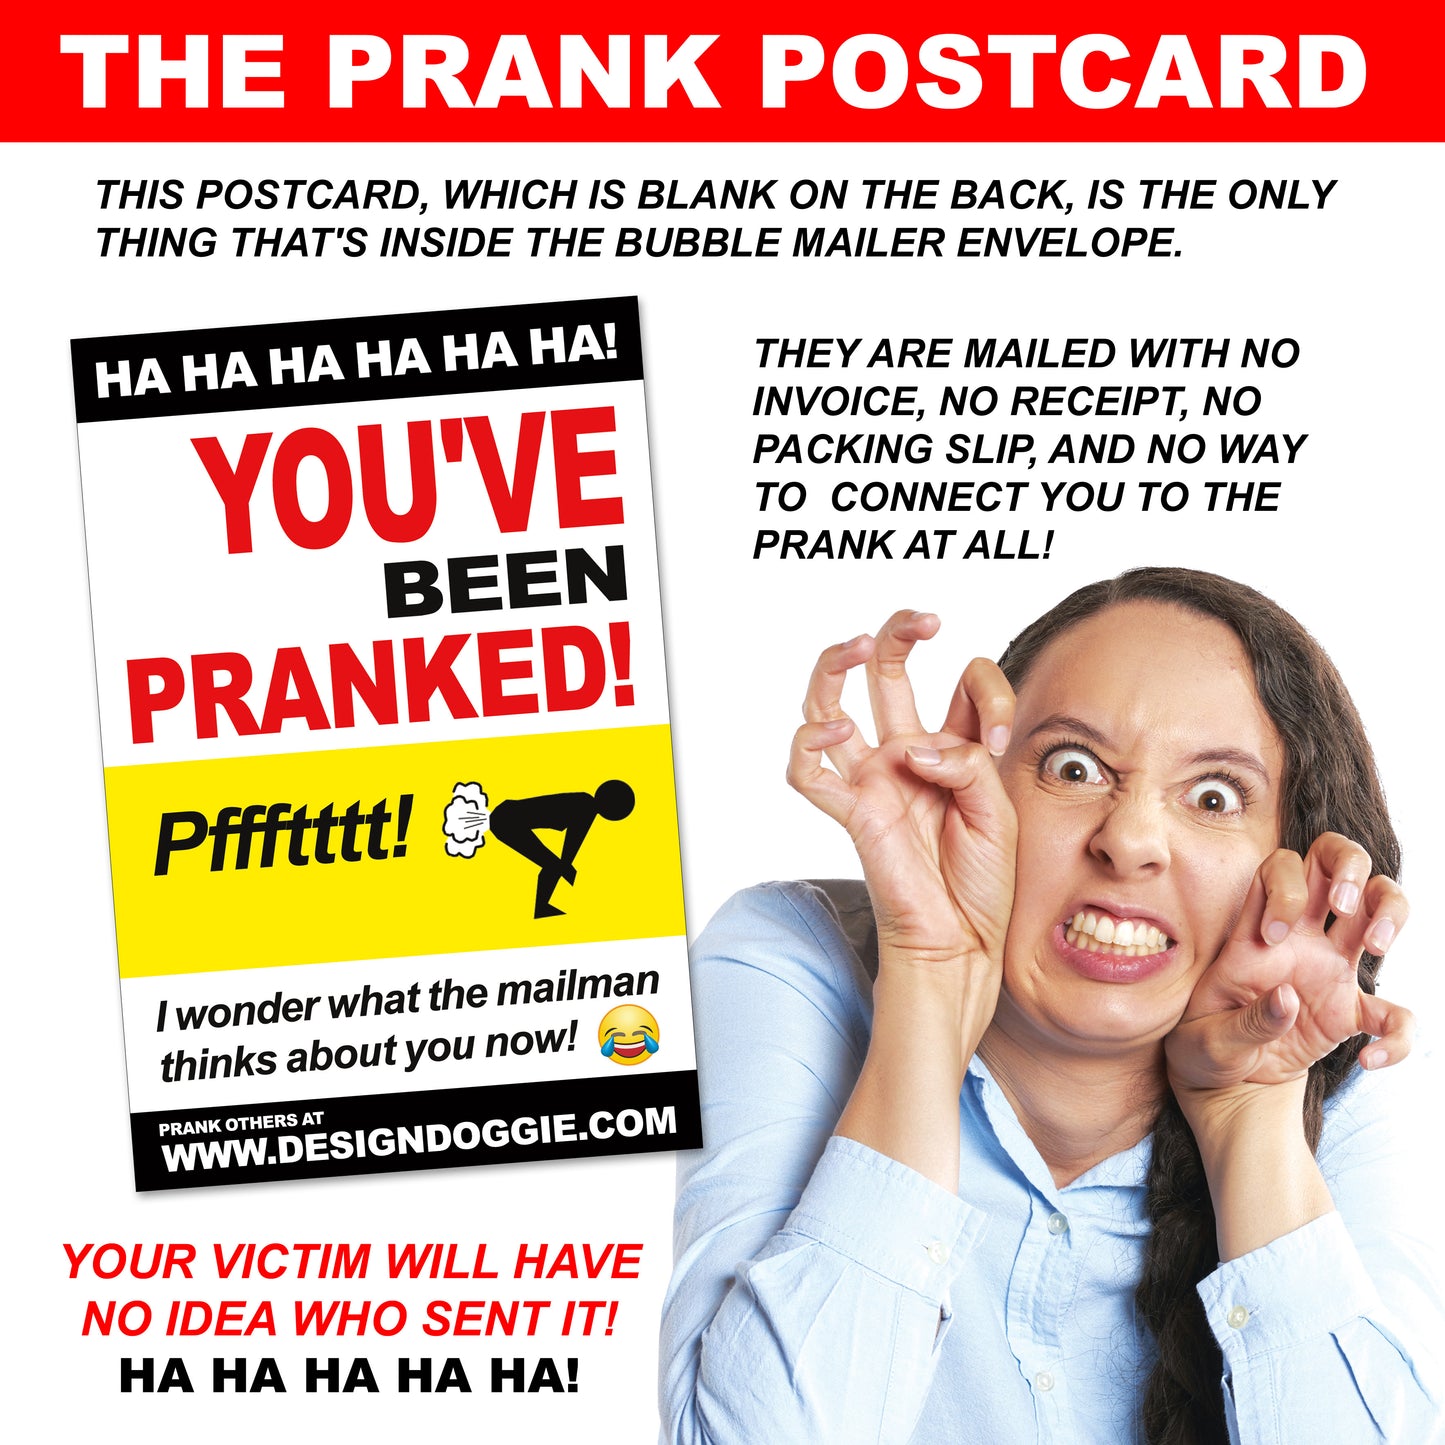 Adult Toy Cleaning Solution embarrassing prank envelope gets mailed directly to your victims 100% anonymously!